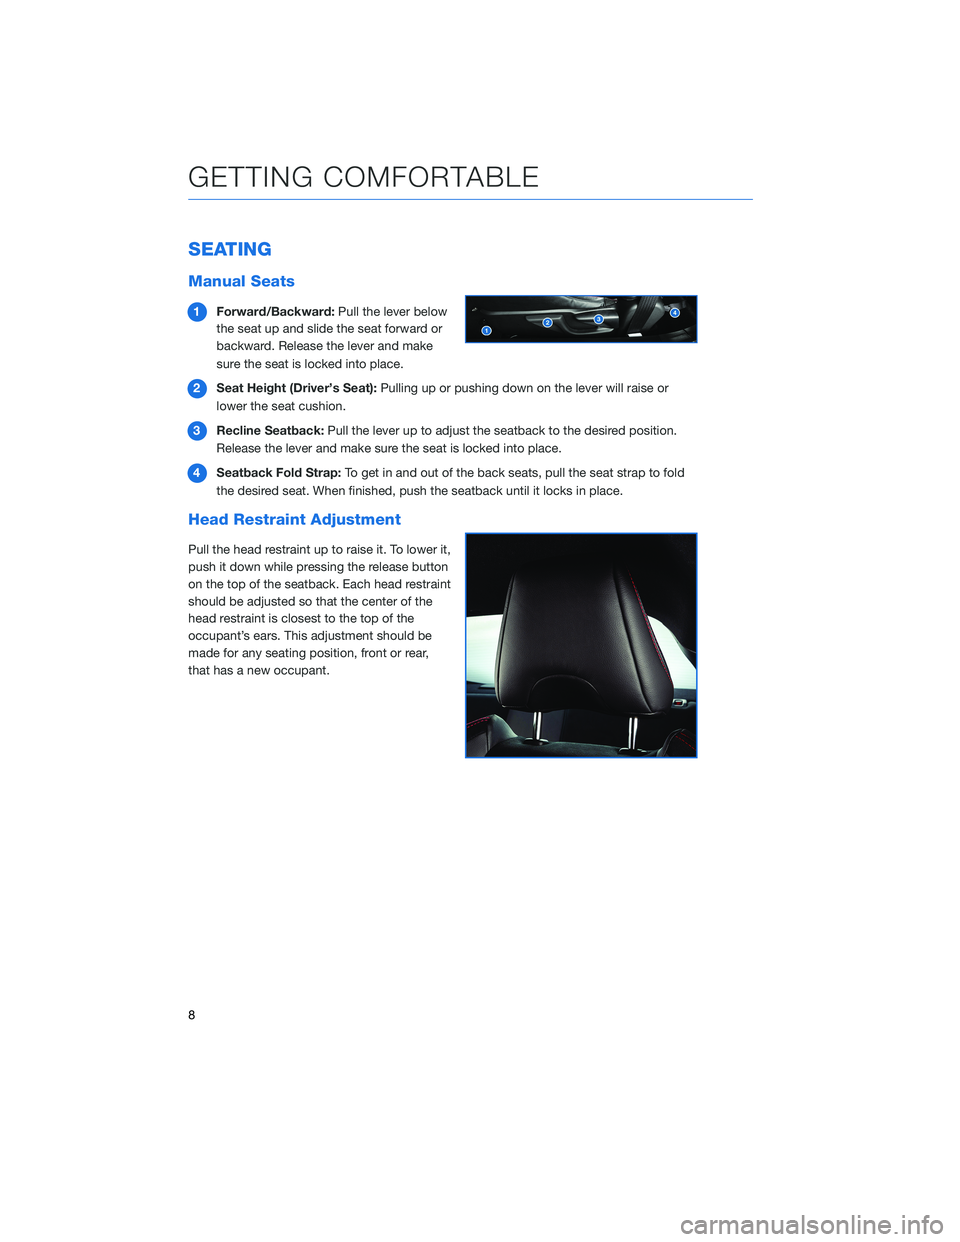 SUBARU BRZ 2020  Quick Guide SEATING
Manual Seats
1Forward/Backward:Pull the lever below
the seat up and slide the seat forward or
backward. Release the lever and make
sure the seat is locked into place.
2Seat Height (Driver’s 